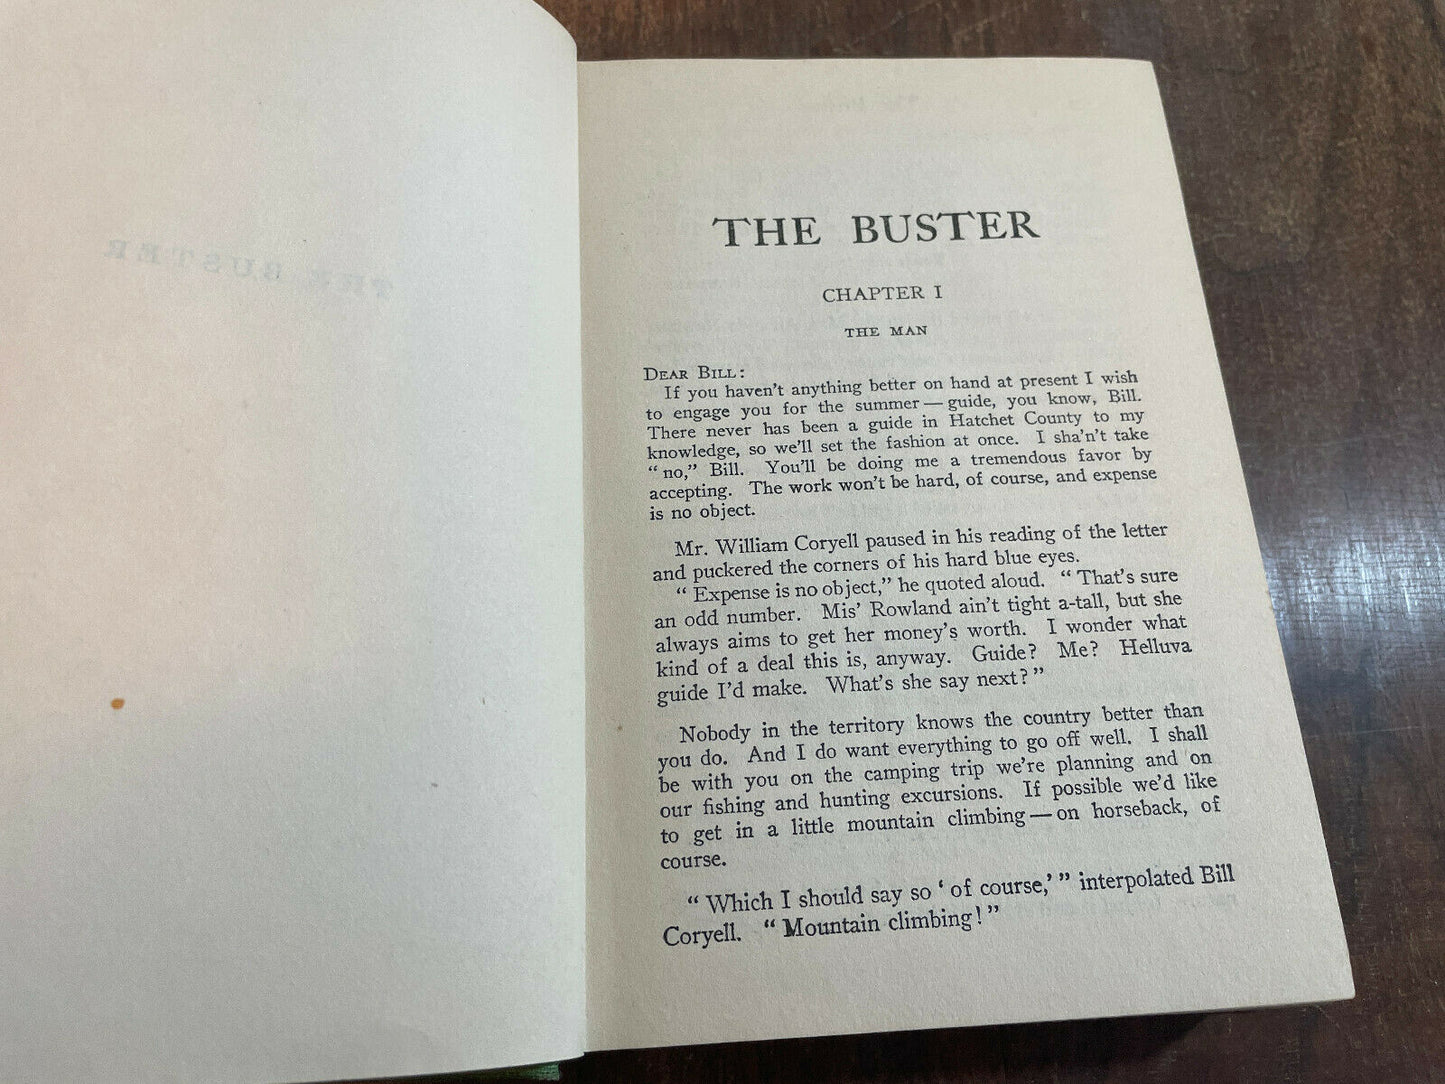 William Patterson WHITE / The Buster First Edition 1926 (J7)